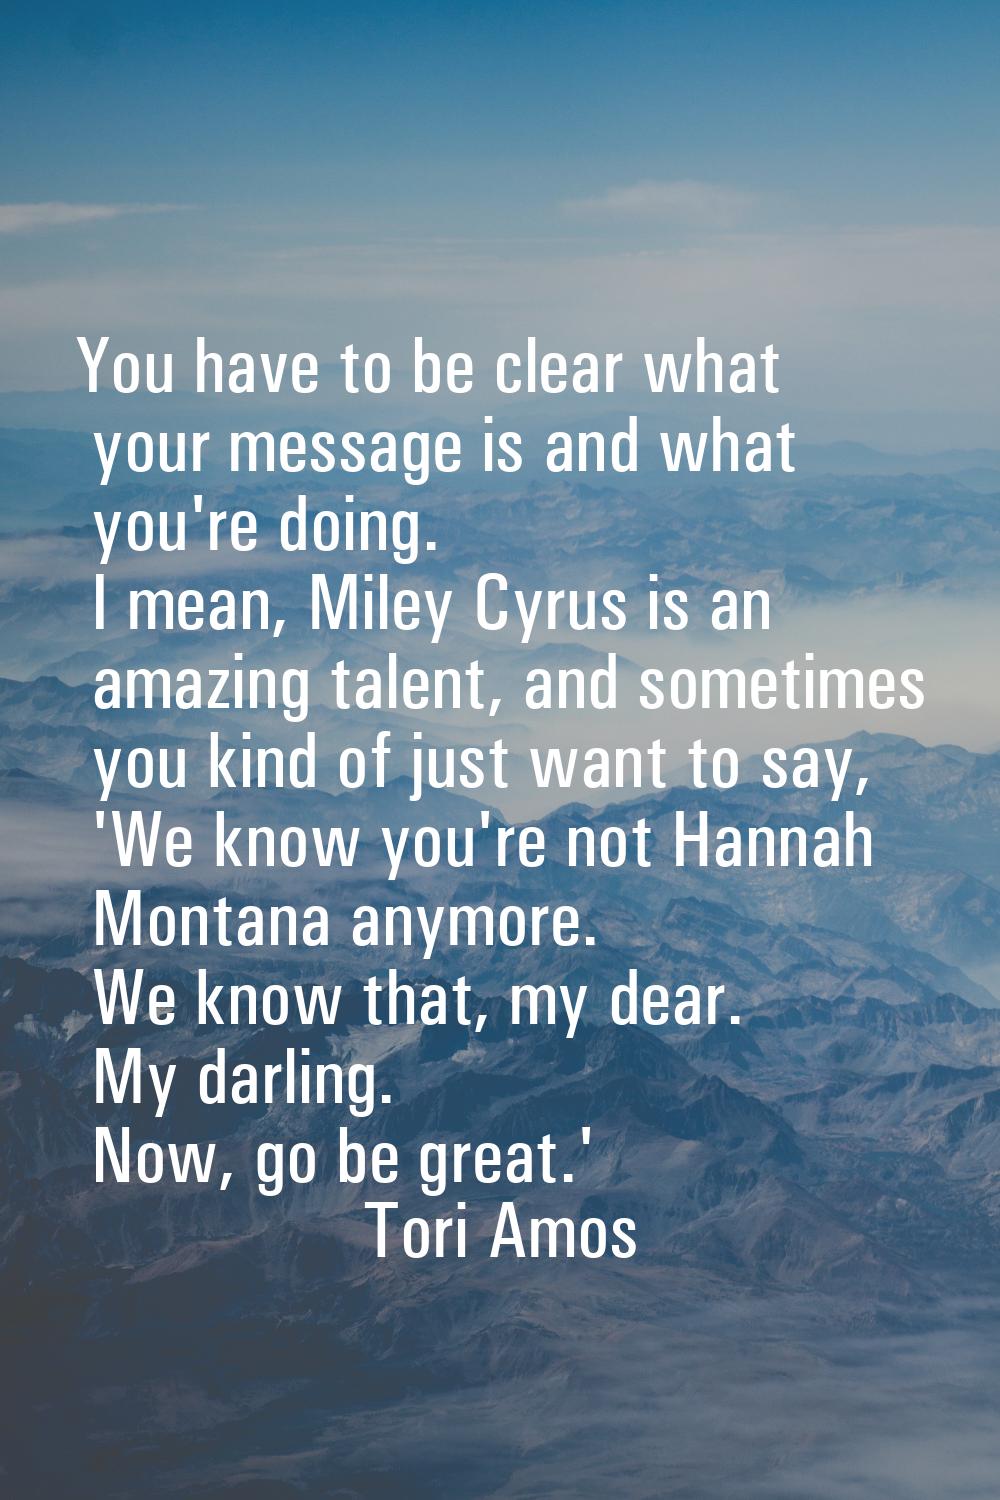 You have to be clear what your message is and what you're doing. I mean, Miley Cyrus is an amazing 